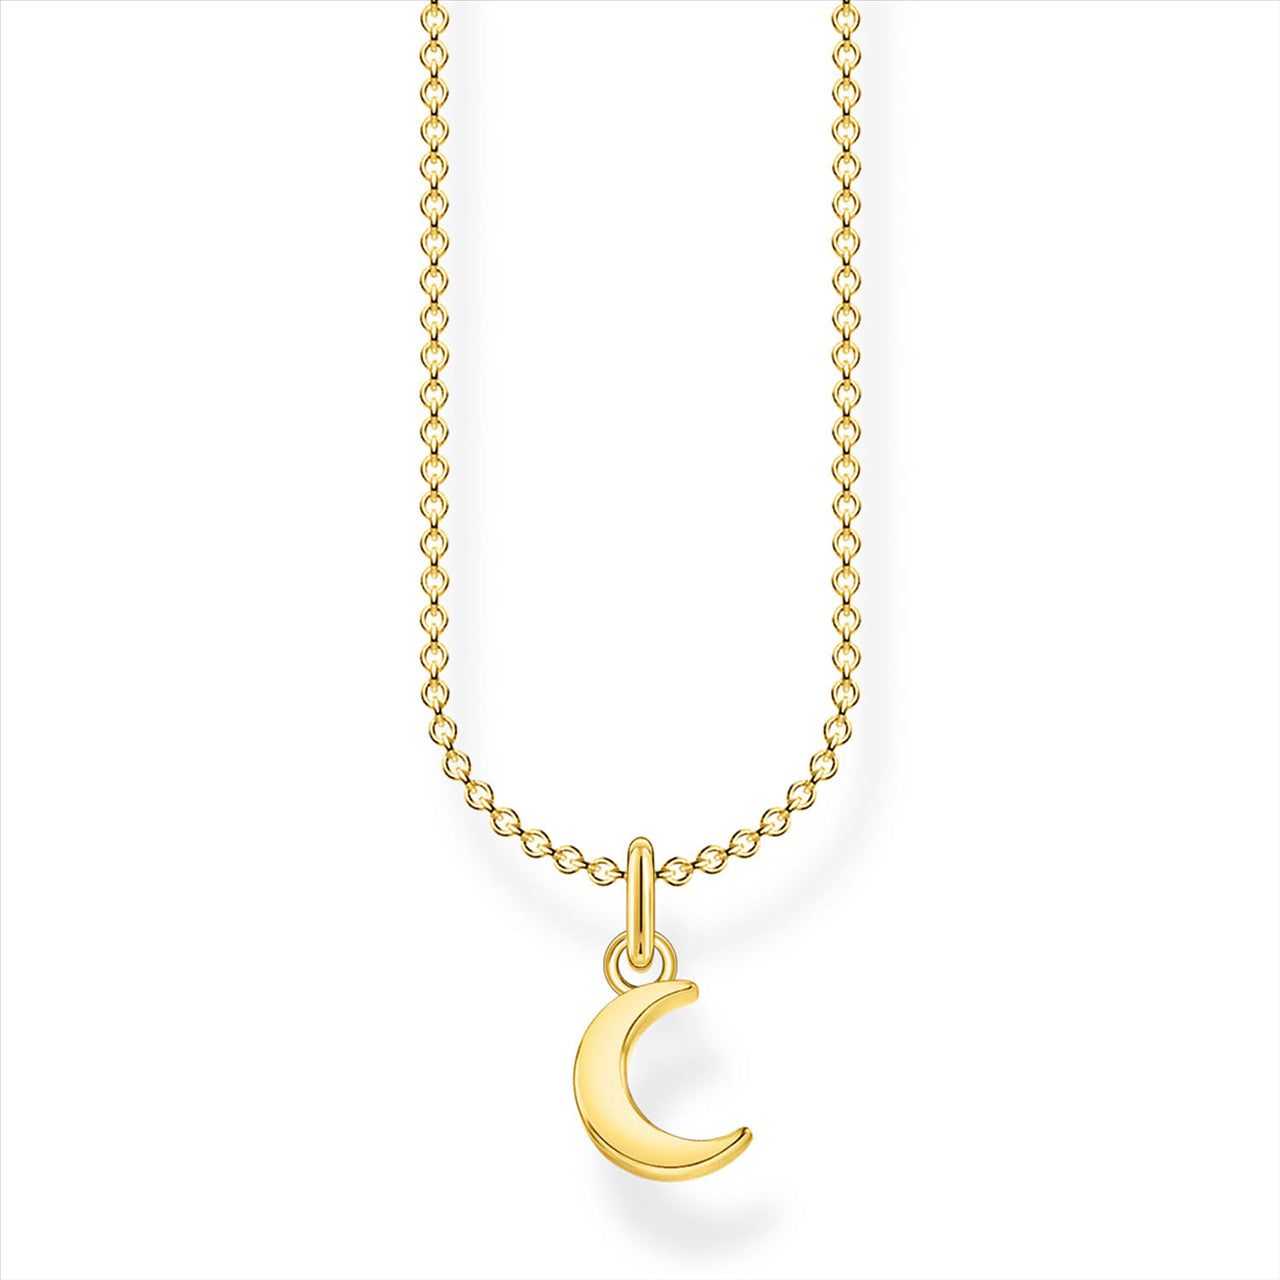 Thomas Sabo Gold Plated Charming Moon Necklace 38-45cm